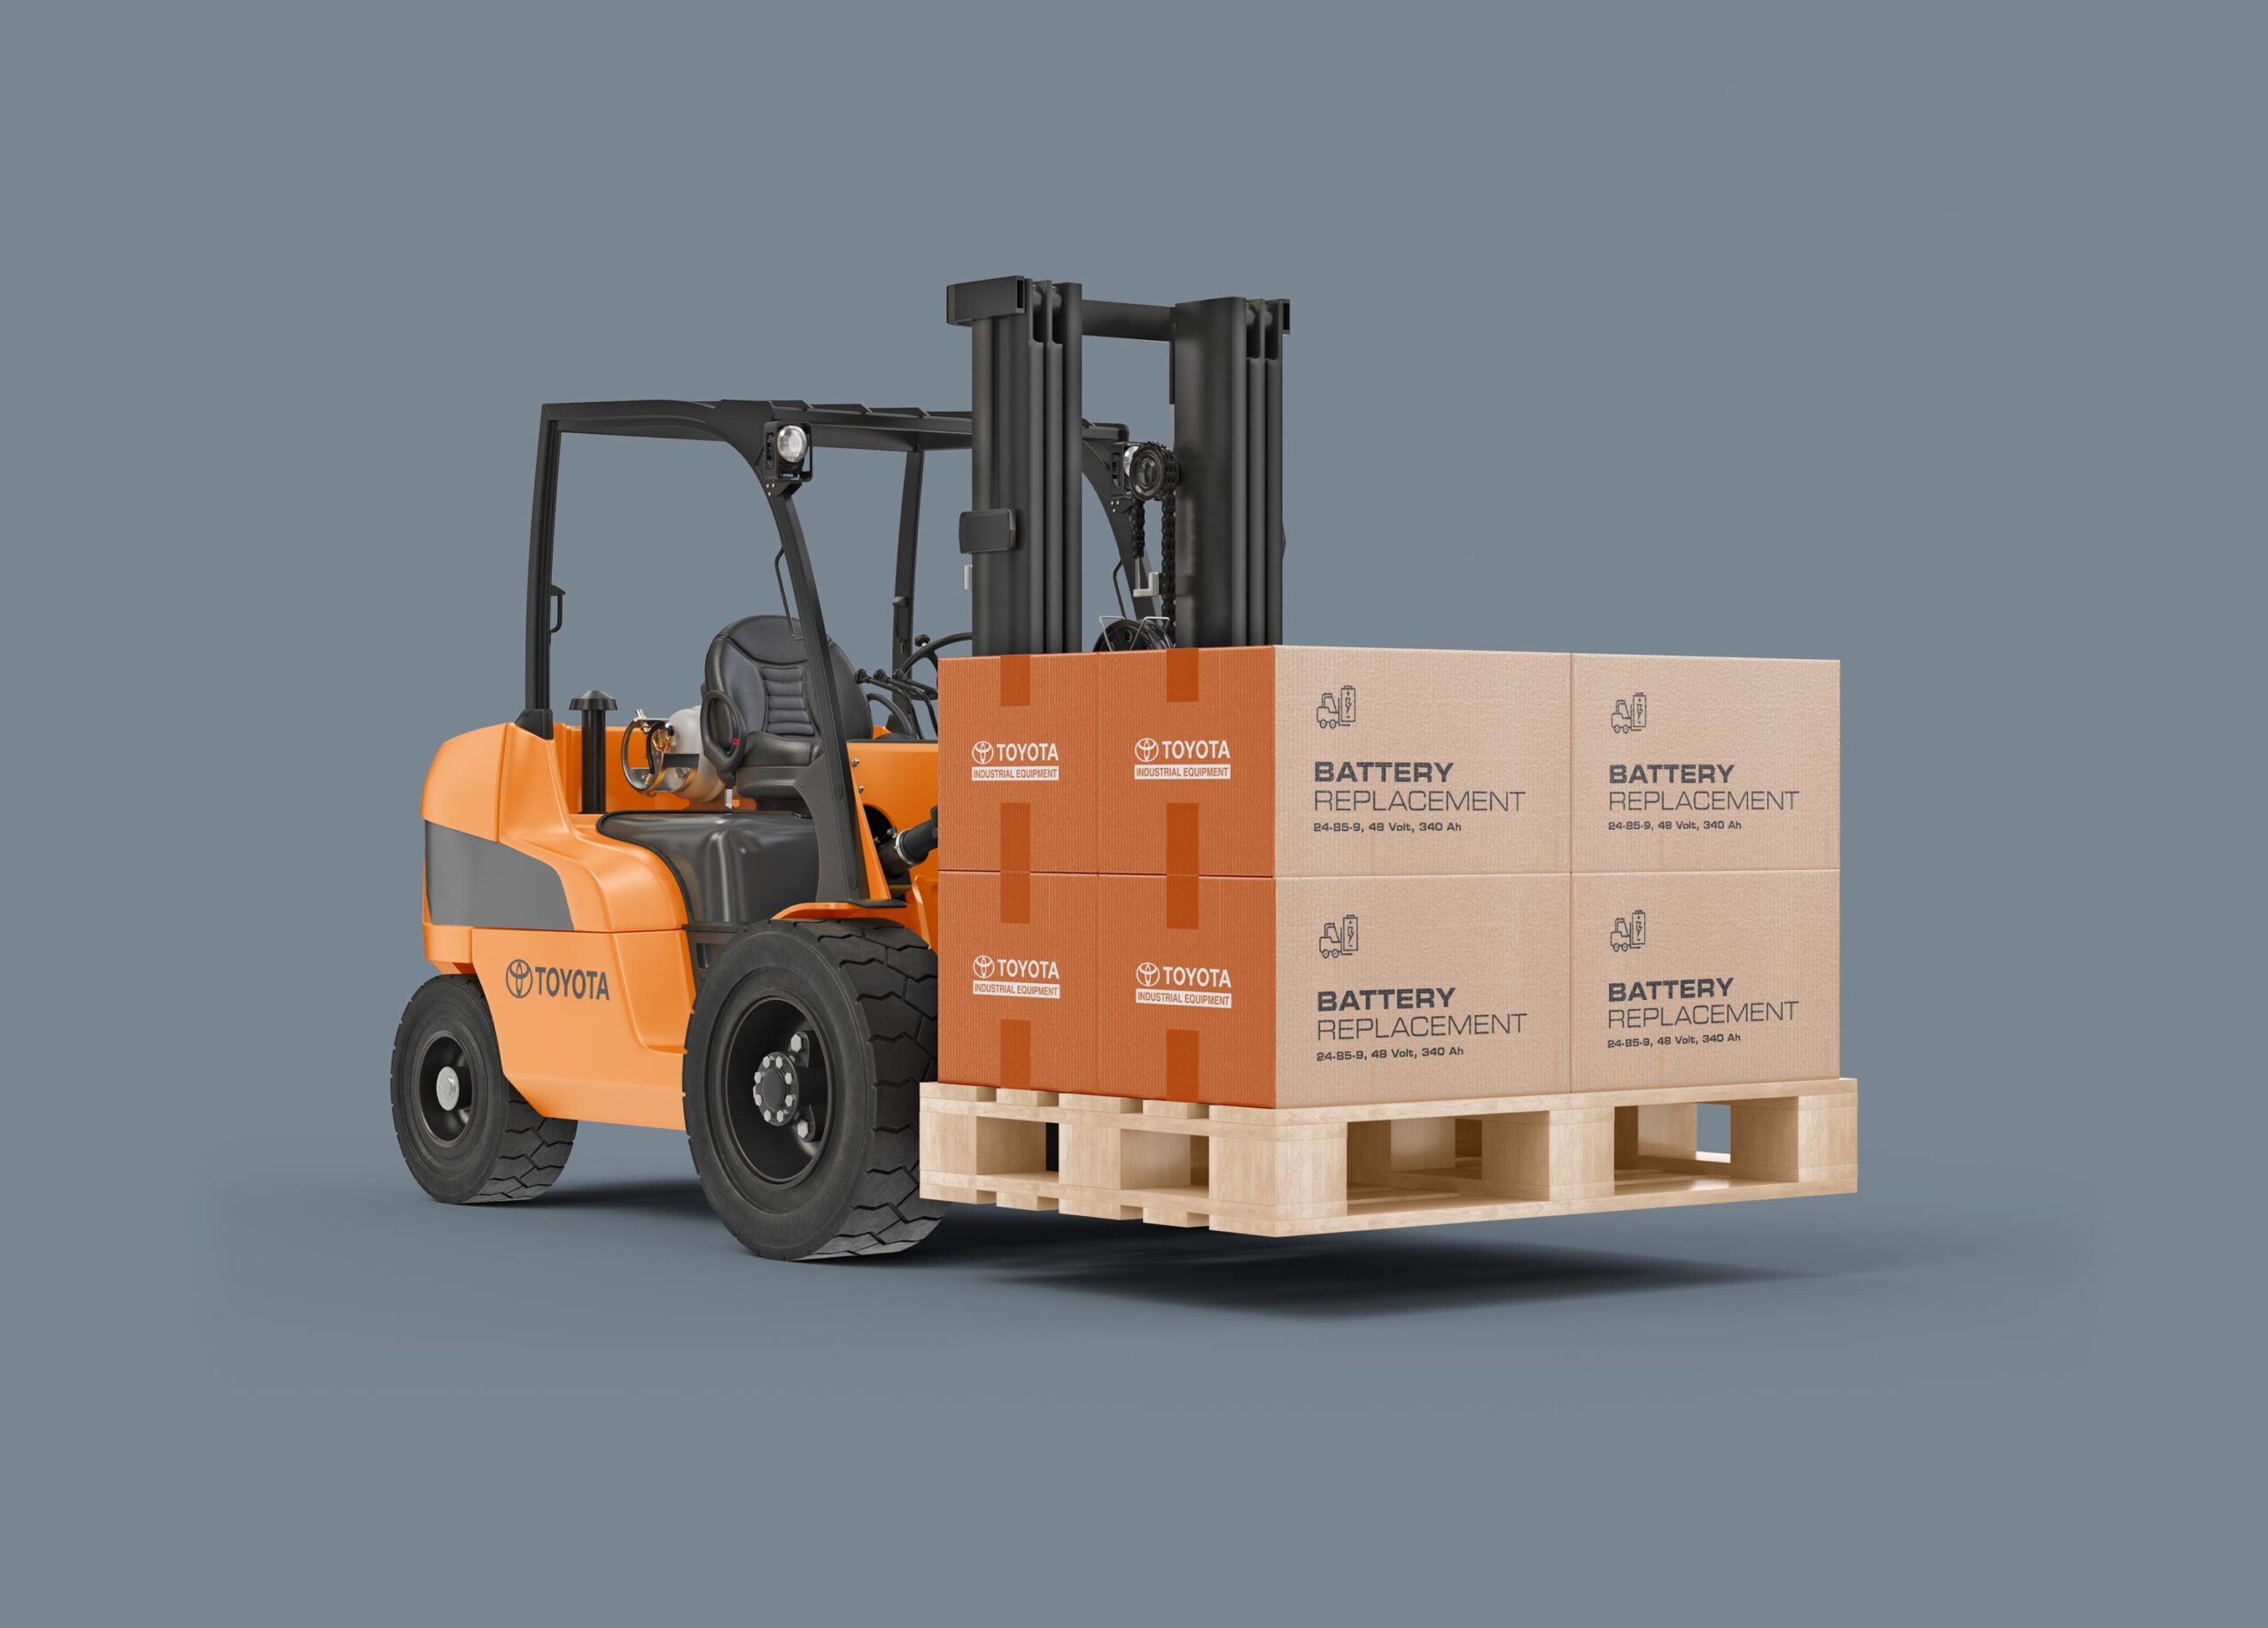 A forklift carrying cardboard boxes with brand logos on them.